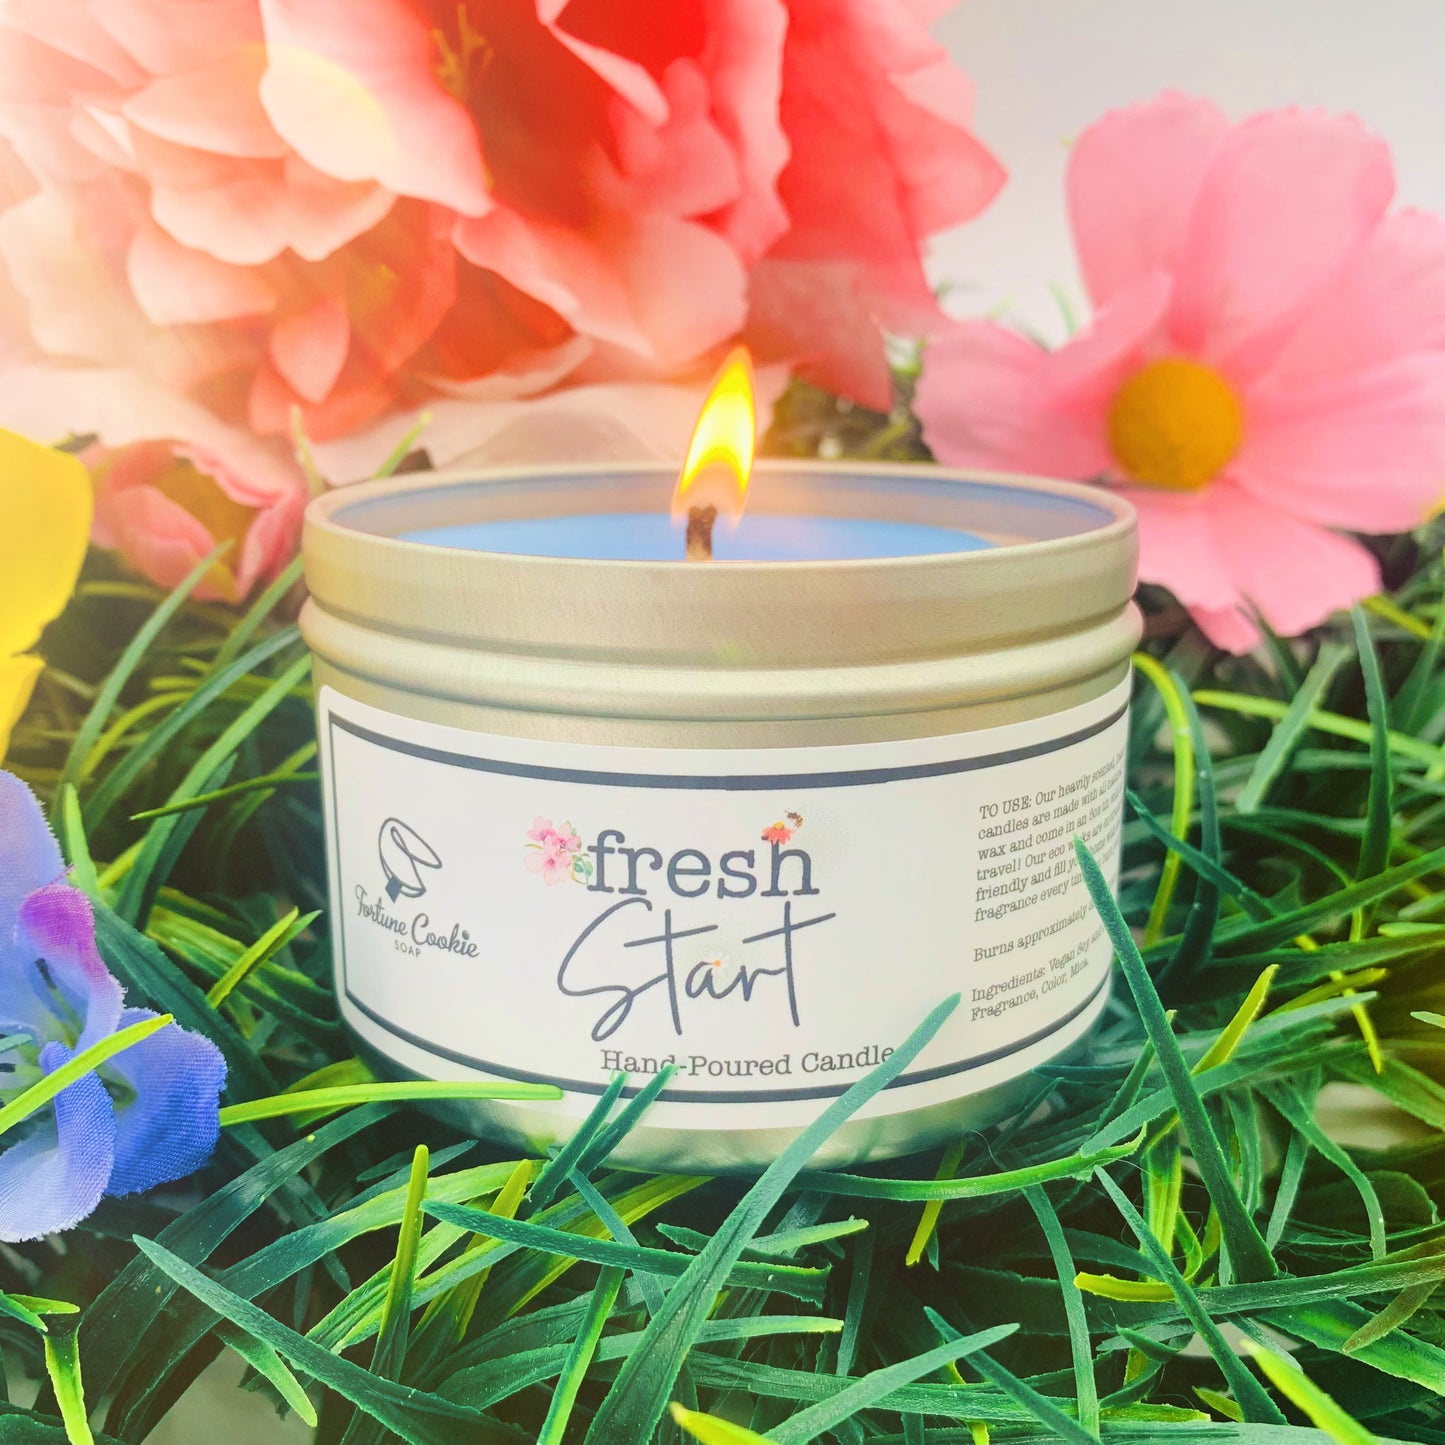 FRESH START XL Hand-Poured Candle